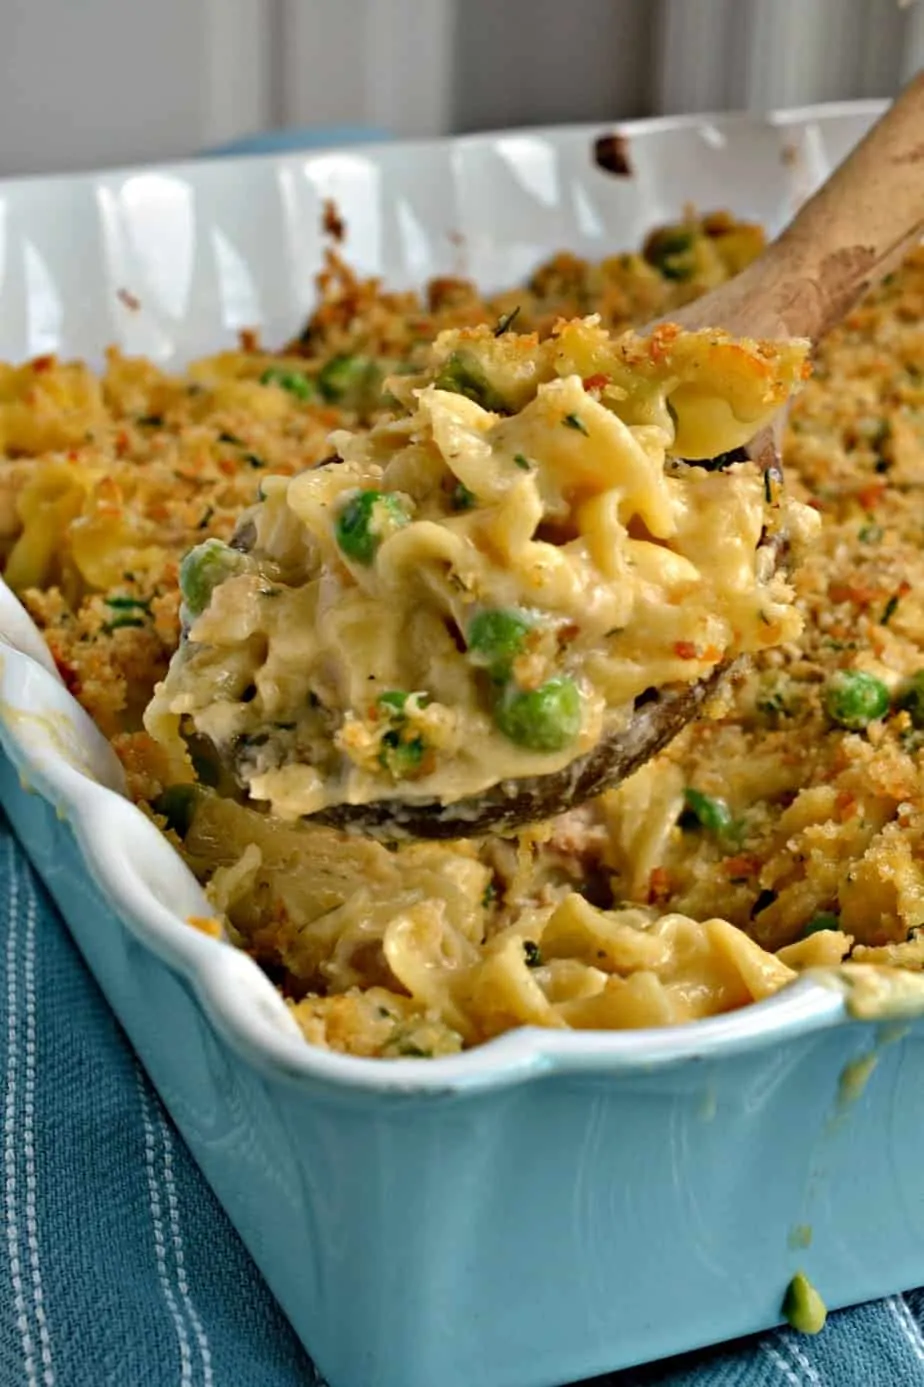 This Tuna Noodle Casserole is one of my husband's favorites and one the whole family enjoys.